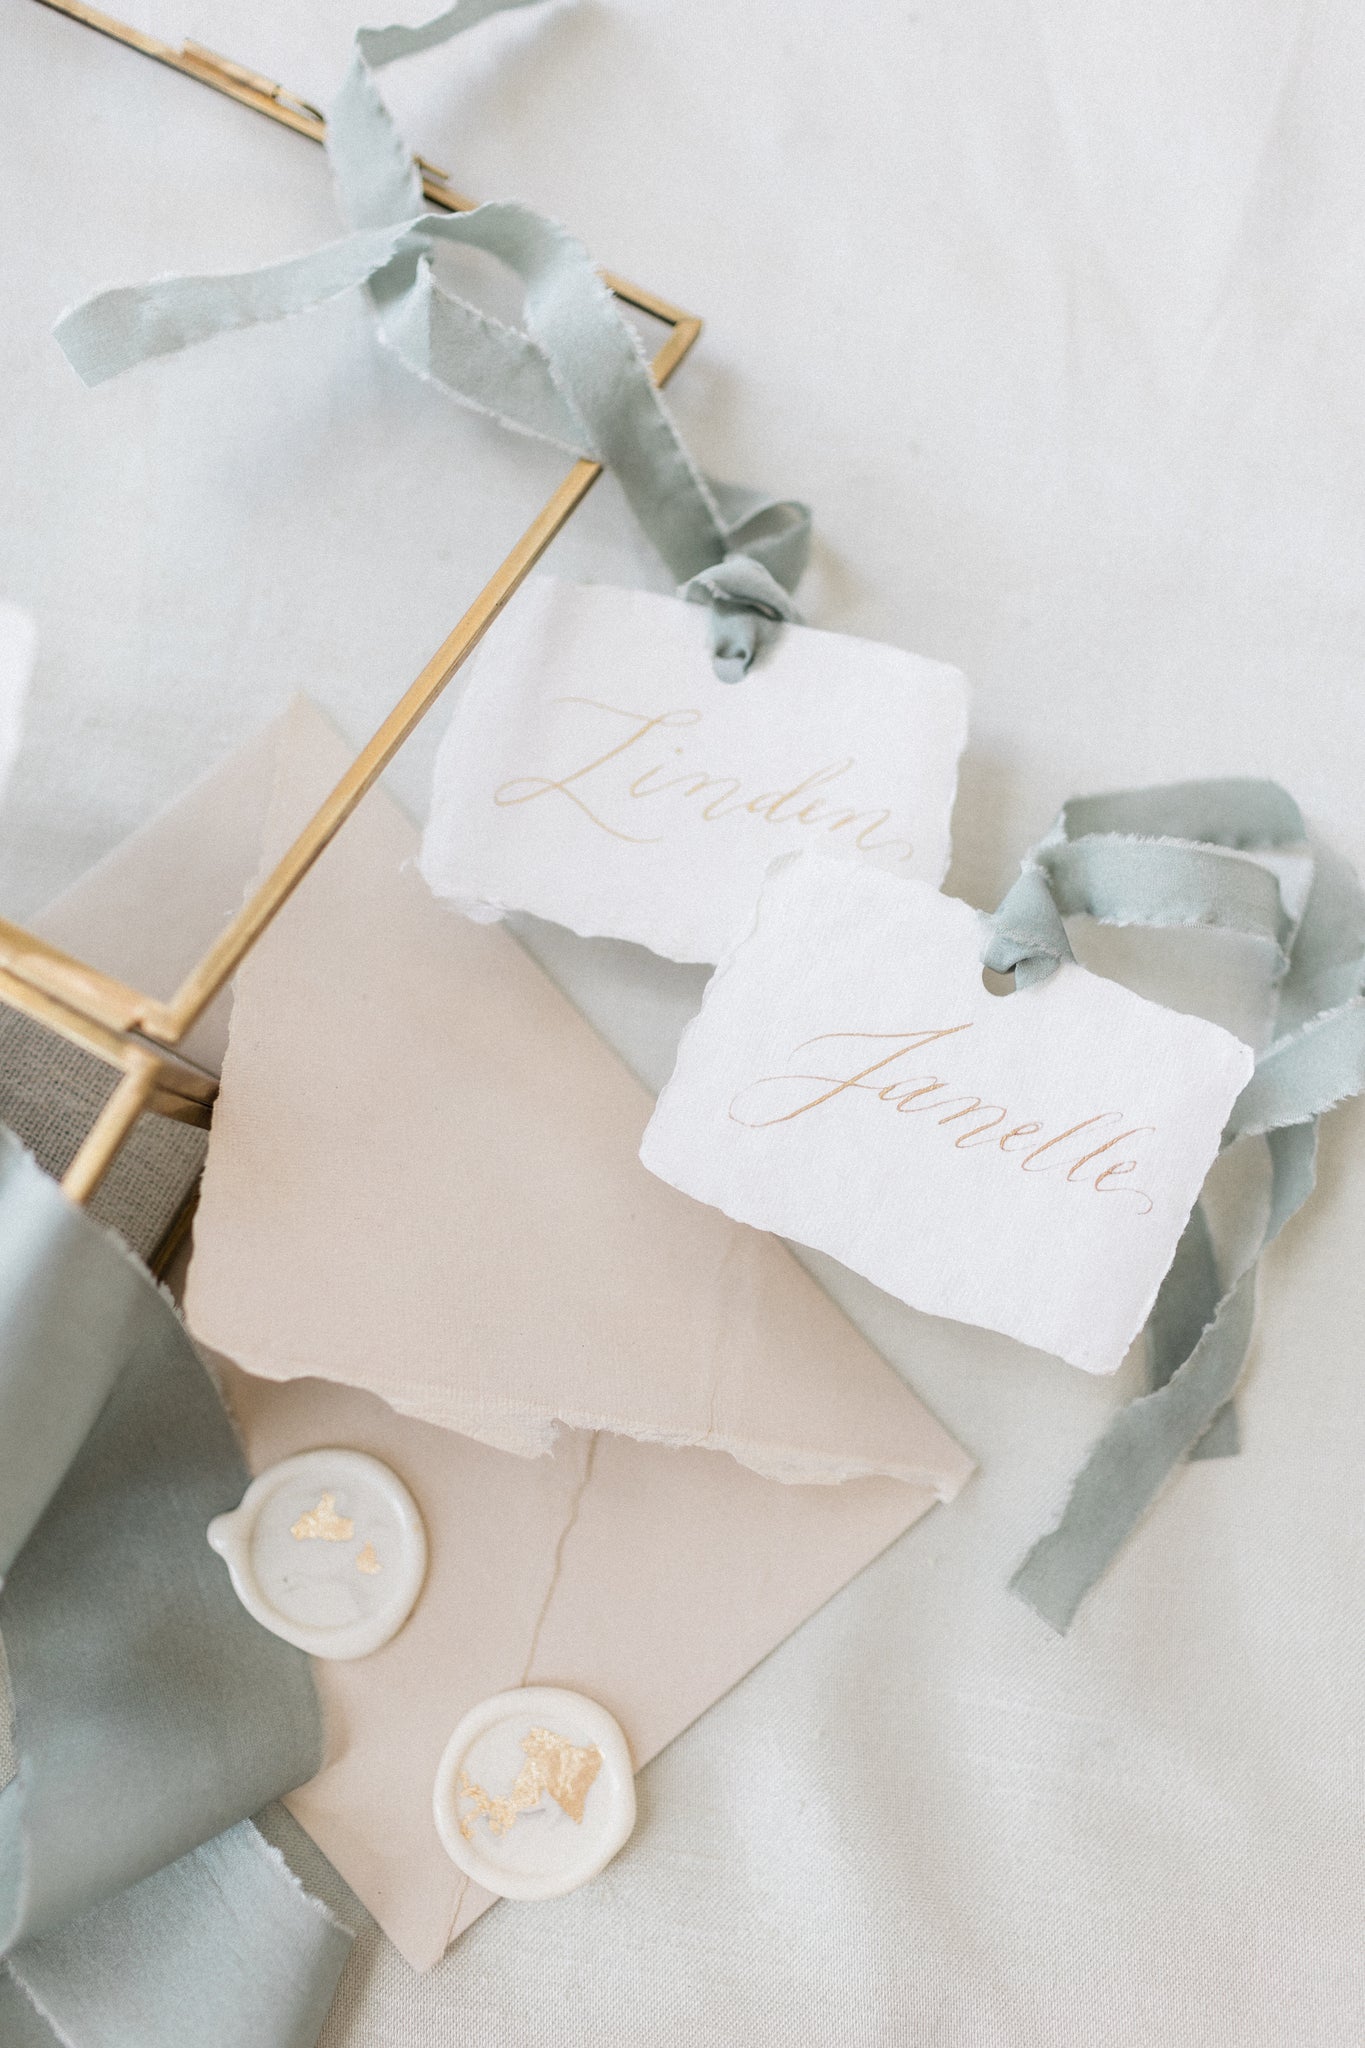 Calligraphy place cards by Papelu Studio – this intimate Canmore, Alberta wedding has a classic palette pairing of blush and sage. Credits: Photo by Modern Nest Photography, Wedding Design & Styling by Rebekah Bronte Design and Bronte Bride